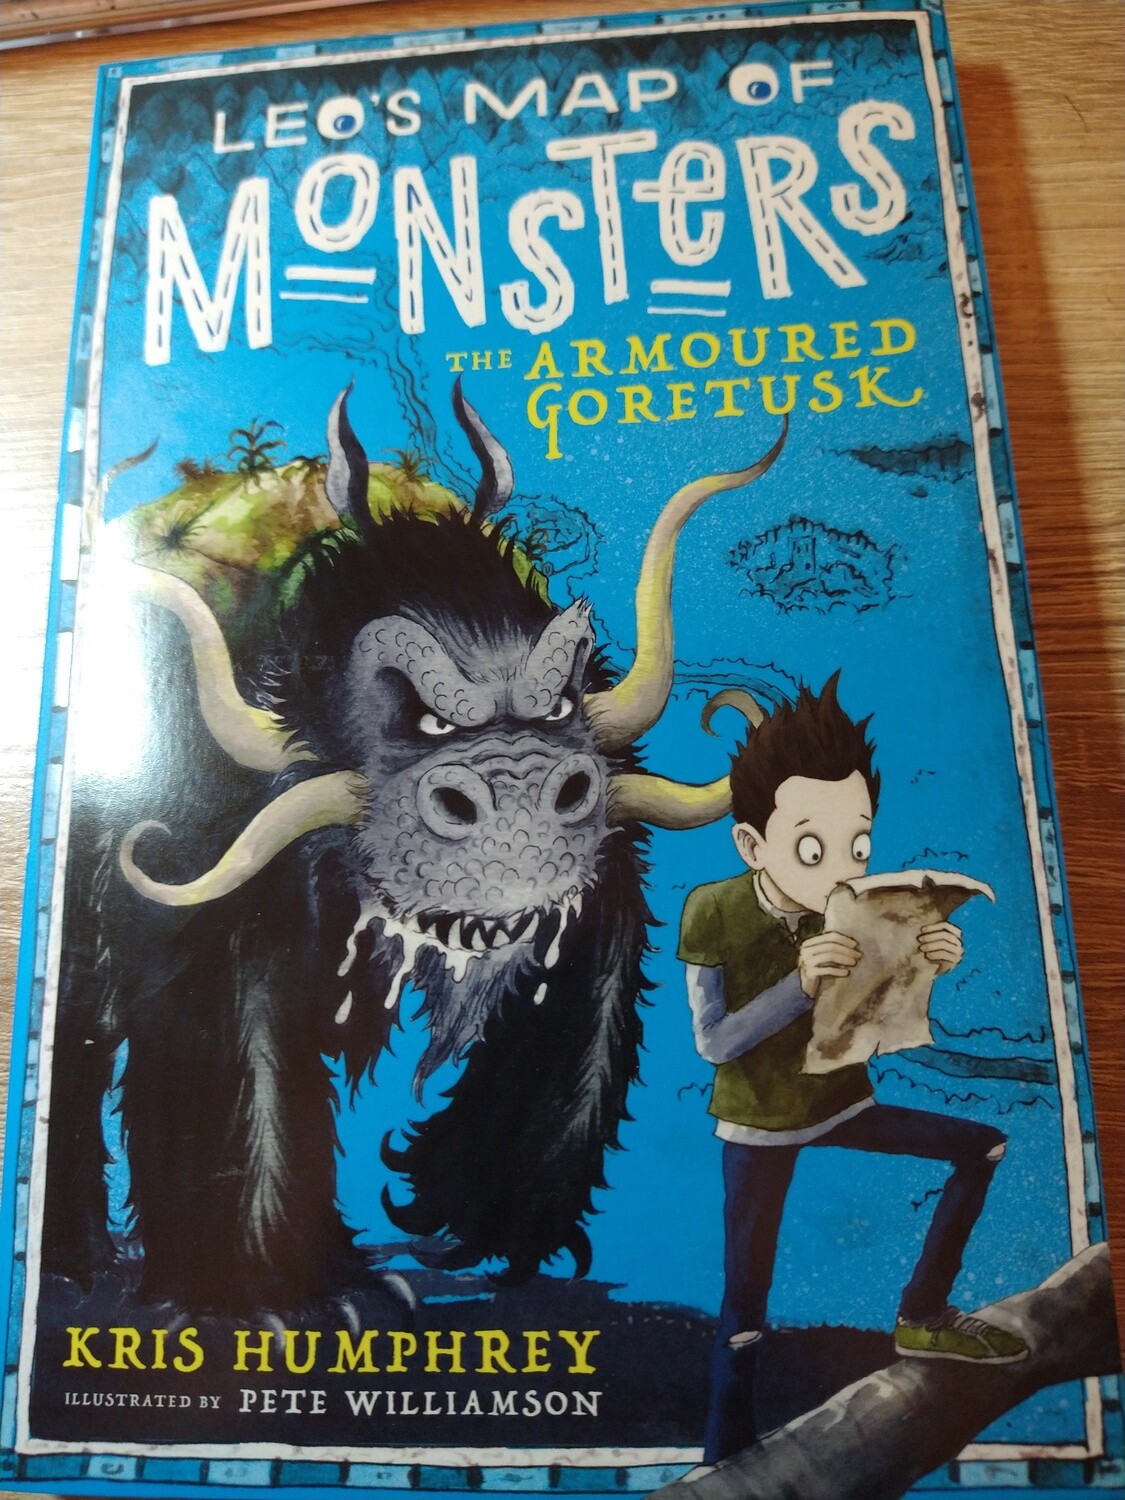 Leo's Map of Monsters: The Amoured Goretusk by Kris Humphrey and Pete  Williamson